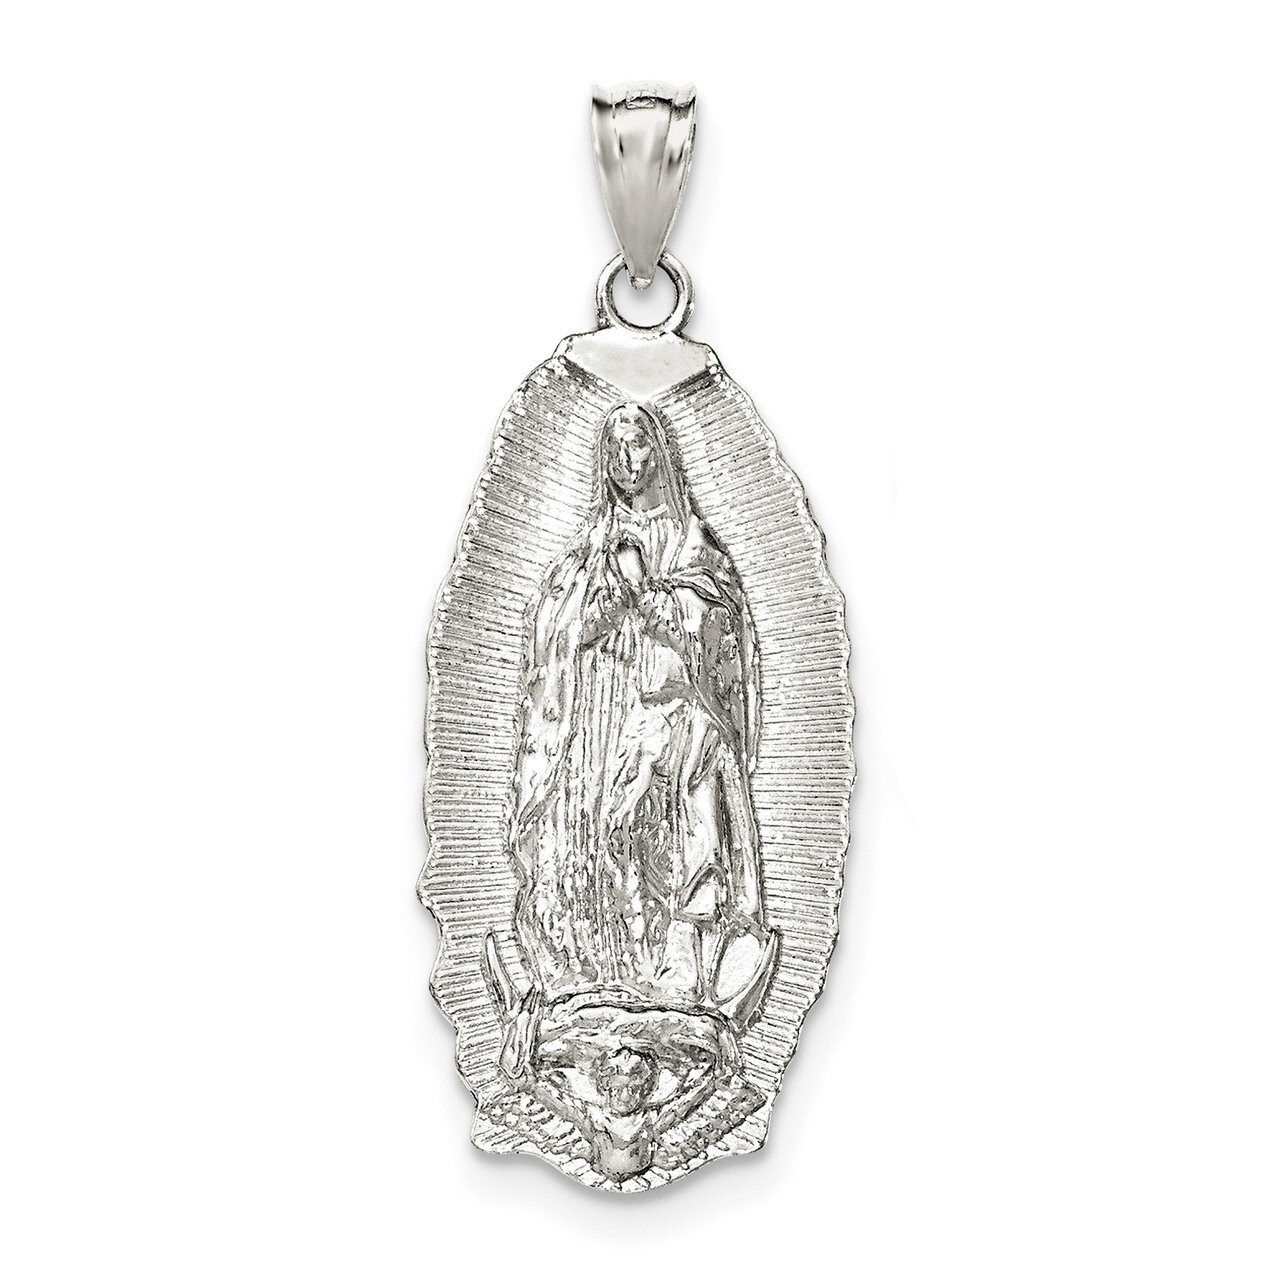 Religious Pendant Sterling Silver Polished QC8372